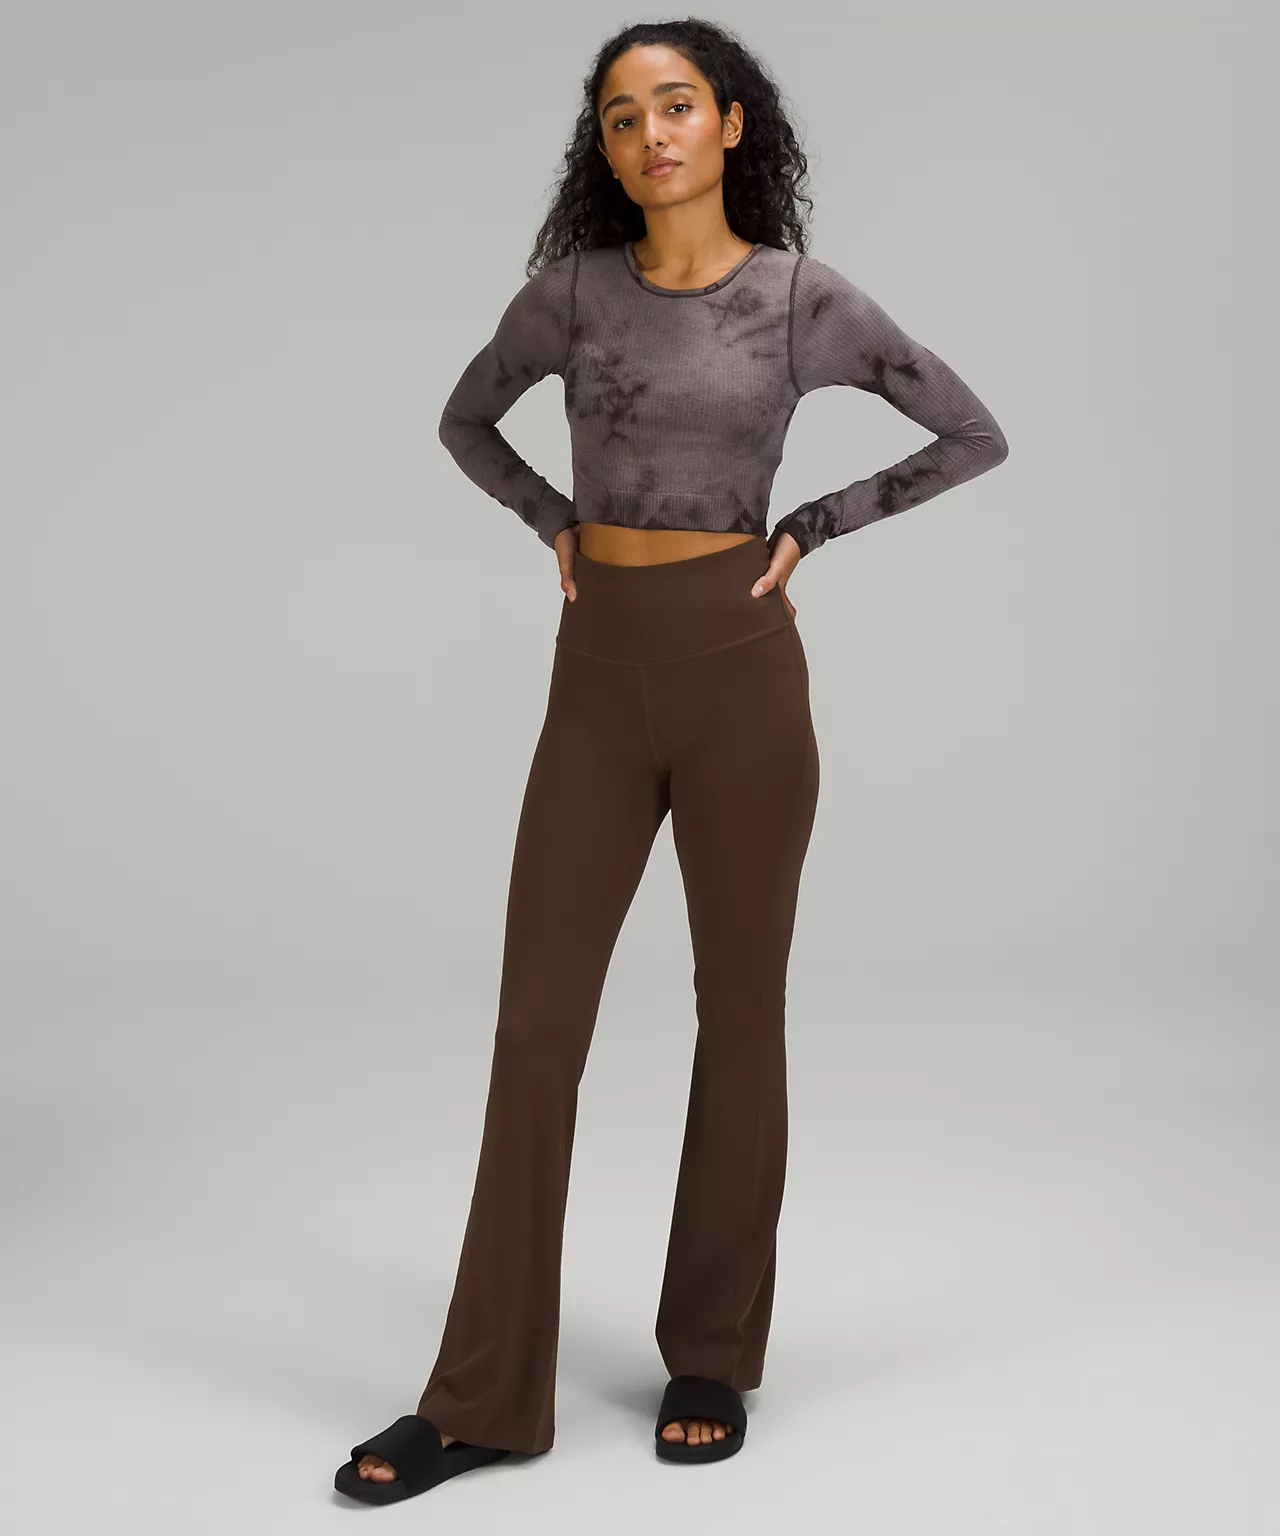 Lululemon In the Groove Slit Flare Pant in the color